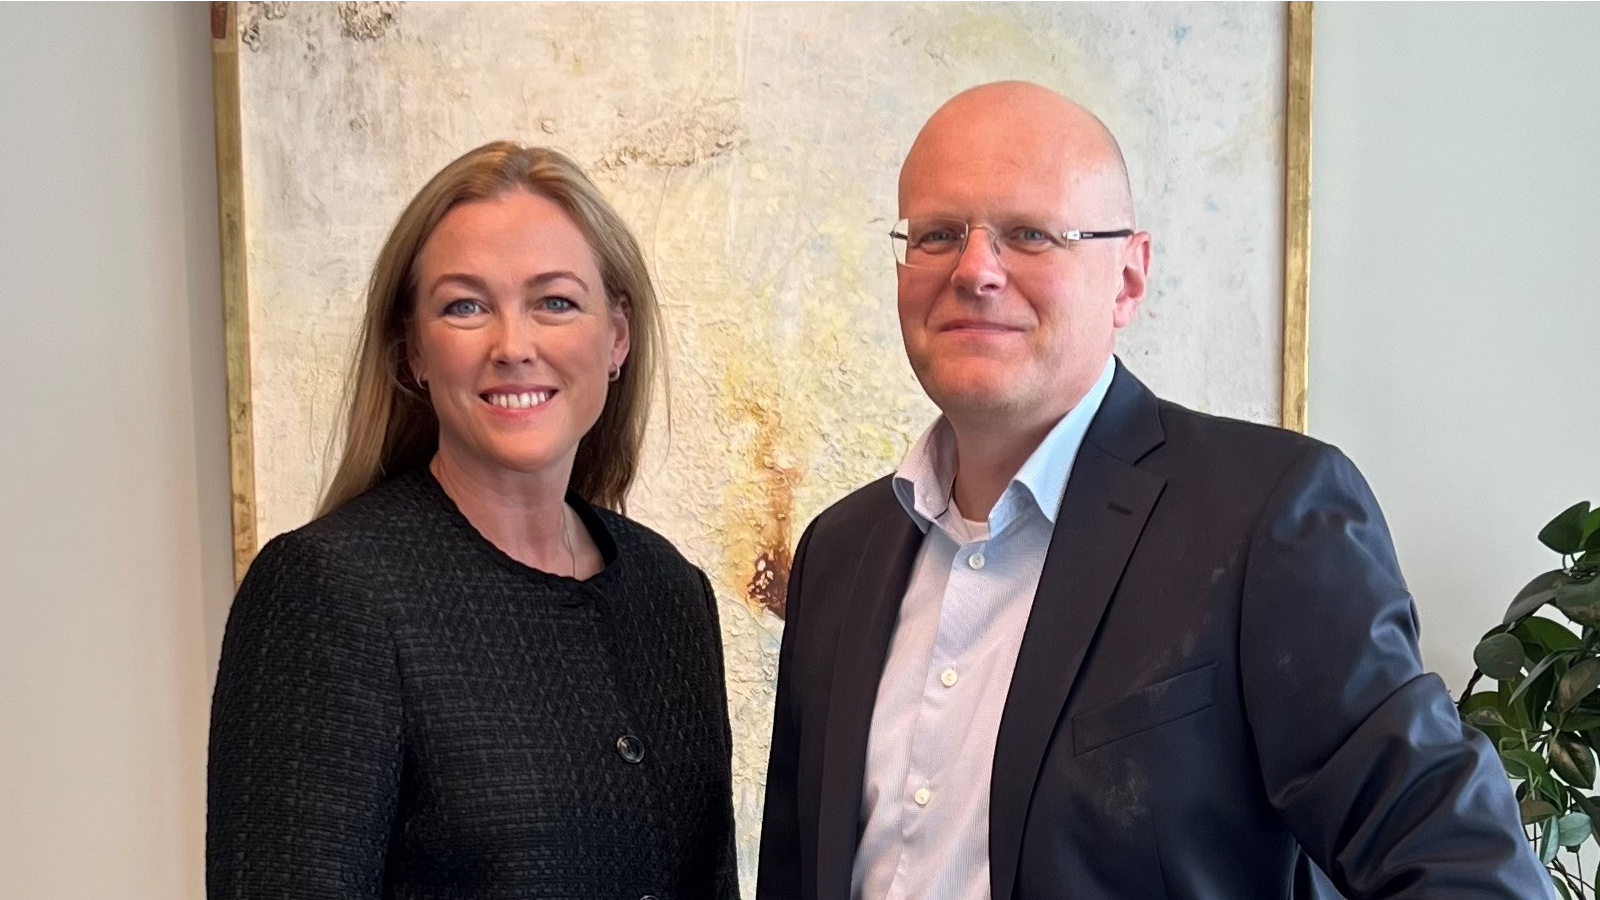 Nordic Interim continues to grow in the Nordics –Now we’re gearing up!